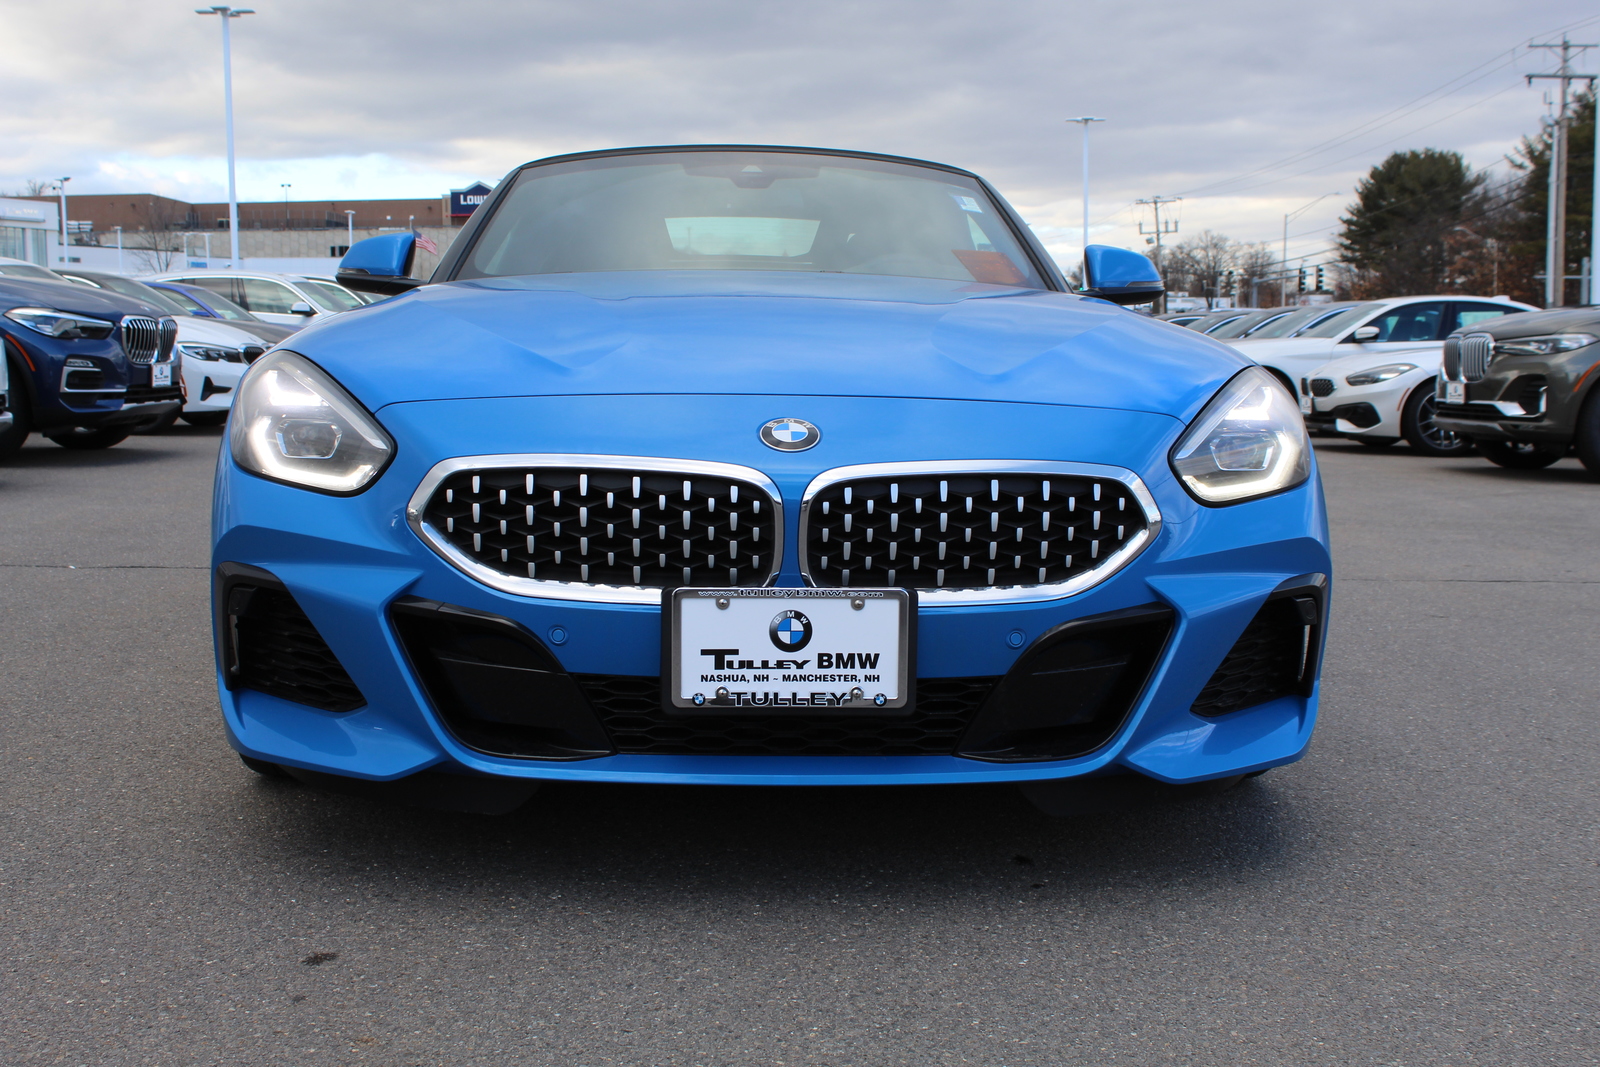 New 2020 BMW Z4 sDrive30i Roadster Convertible in Nashua #B20847